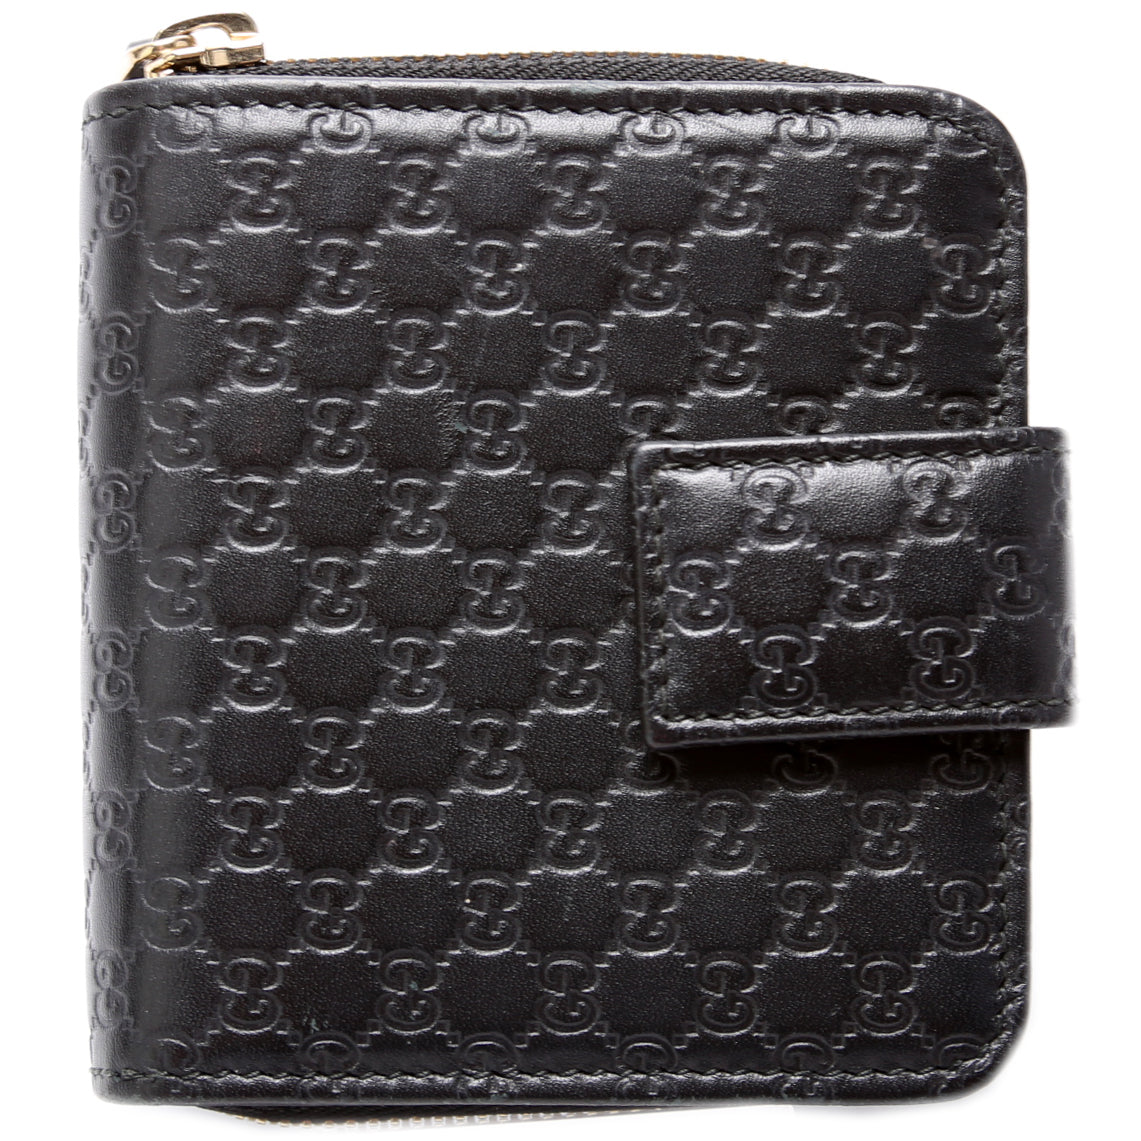 449395 Guccissima Compact Wallet